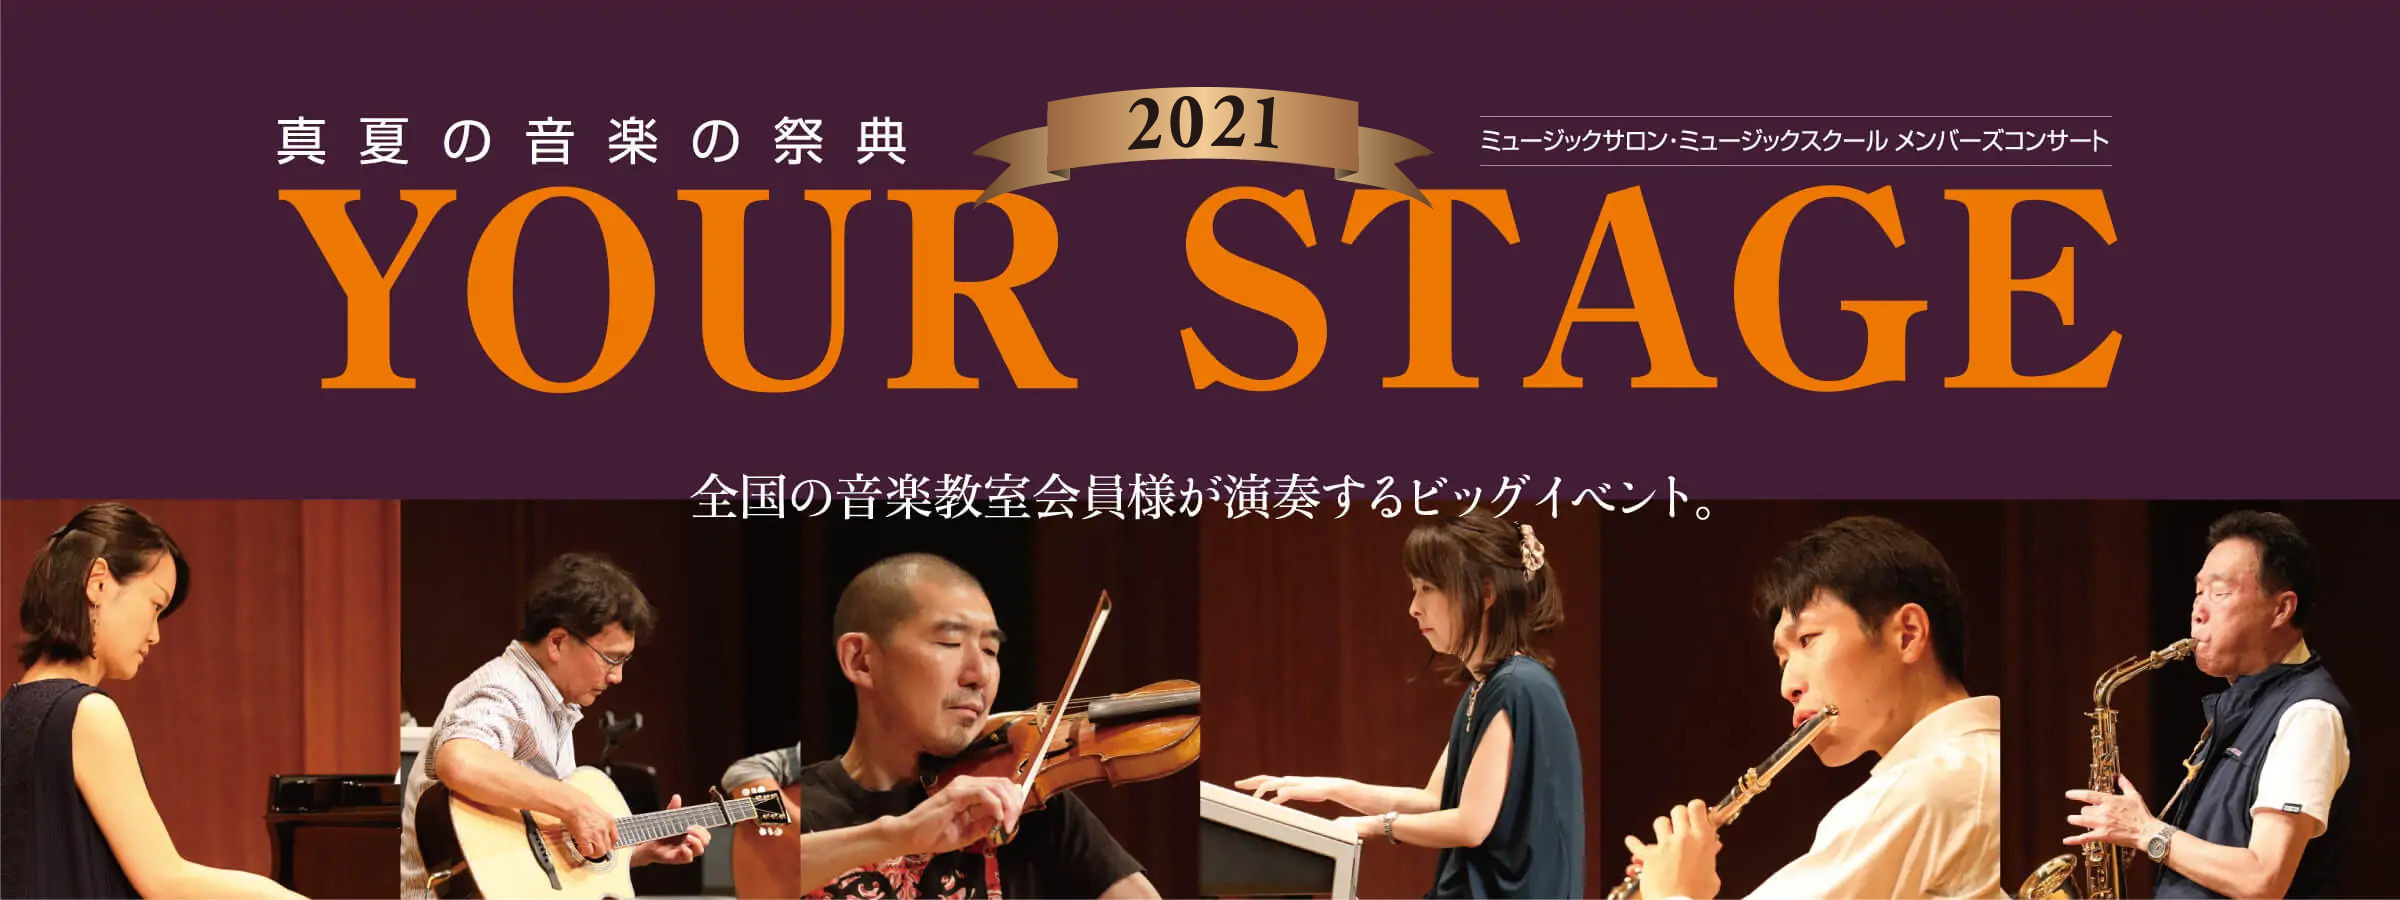 YOUR STAGE2021　5月1日(土)チケット販売スタート！